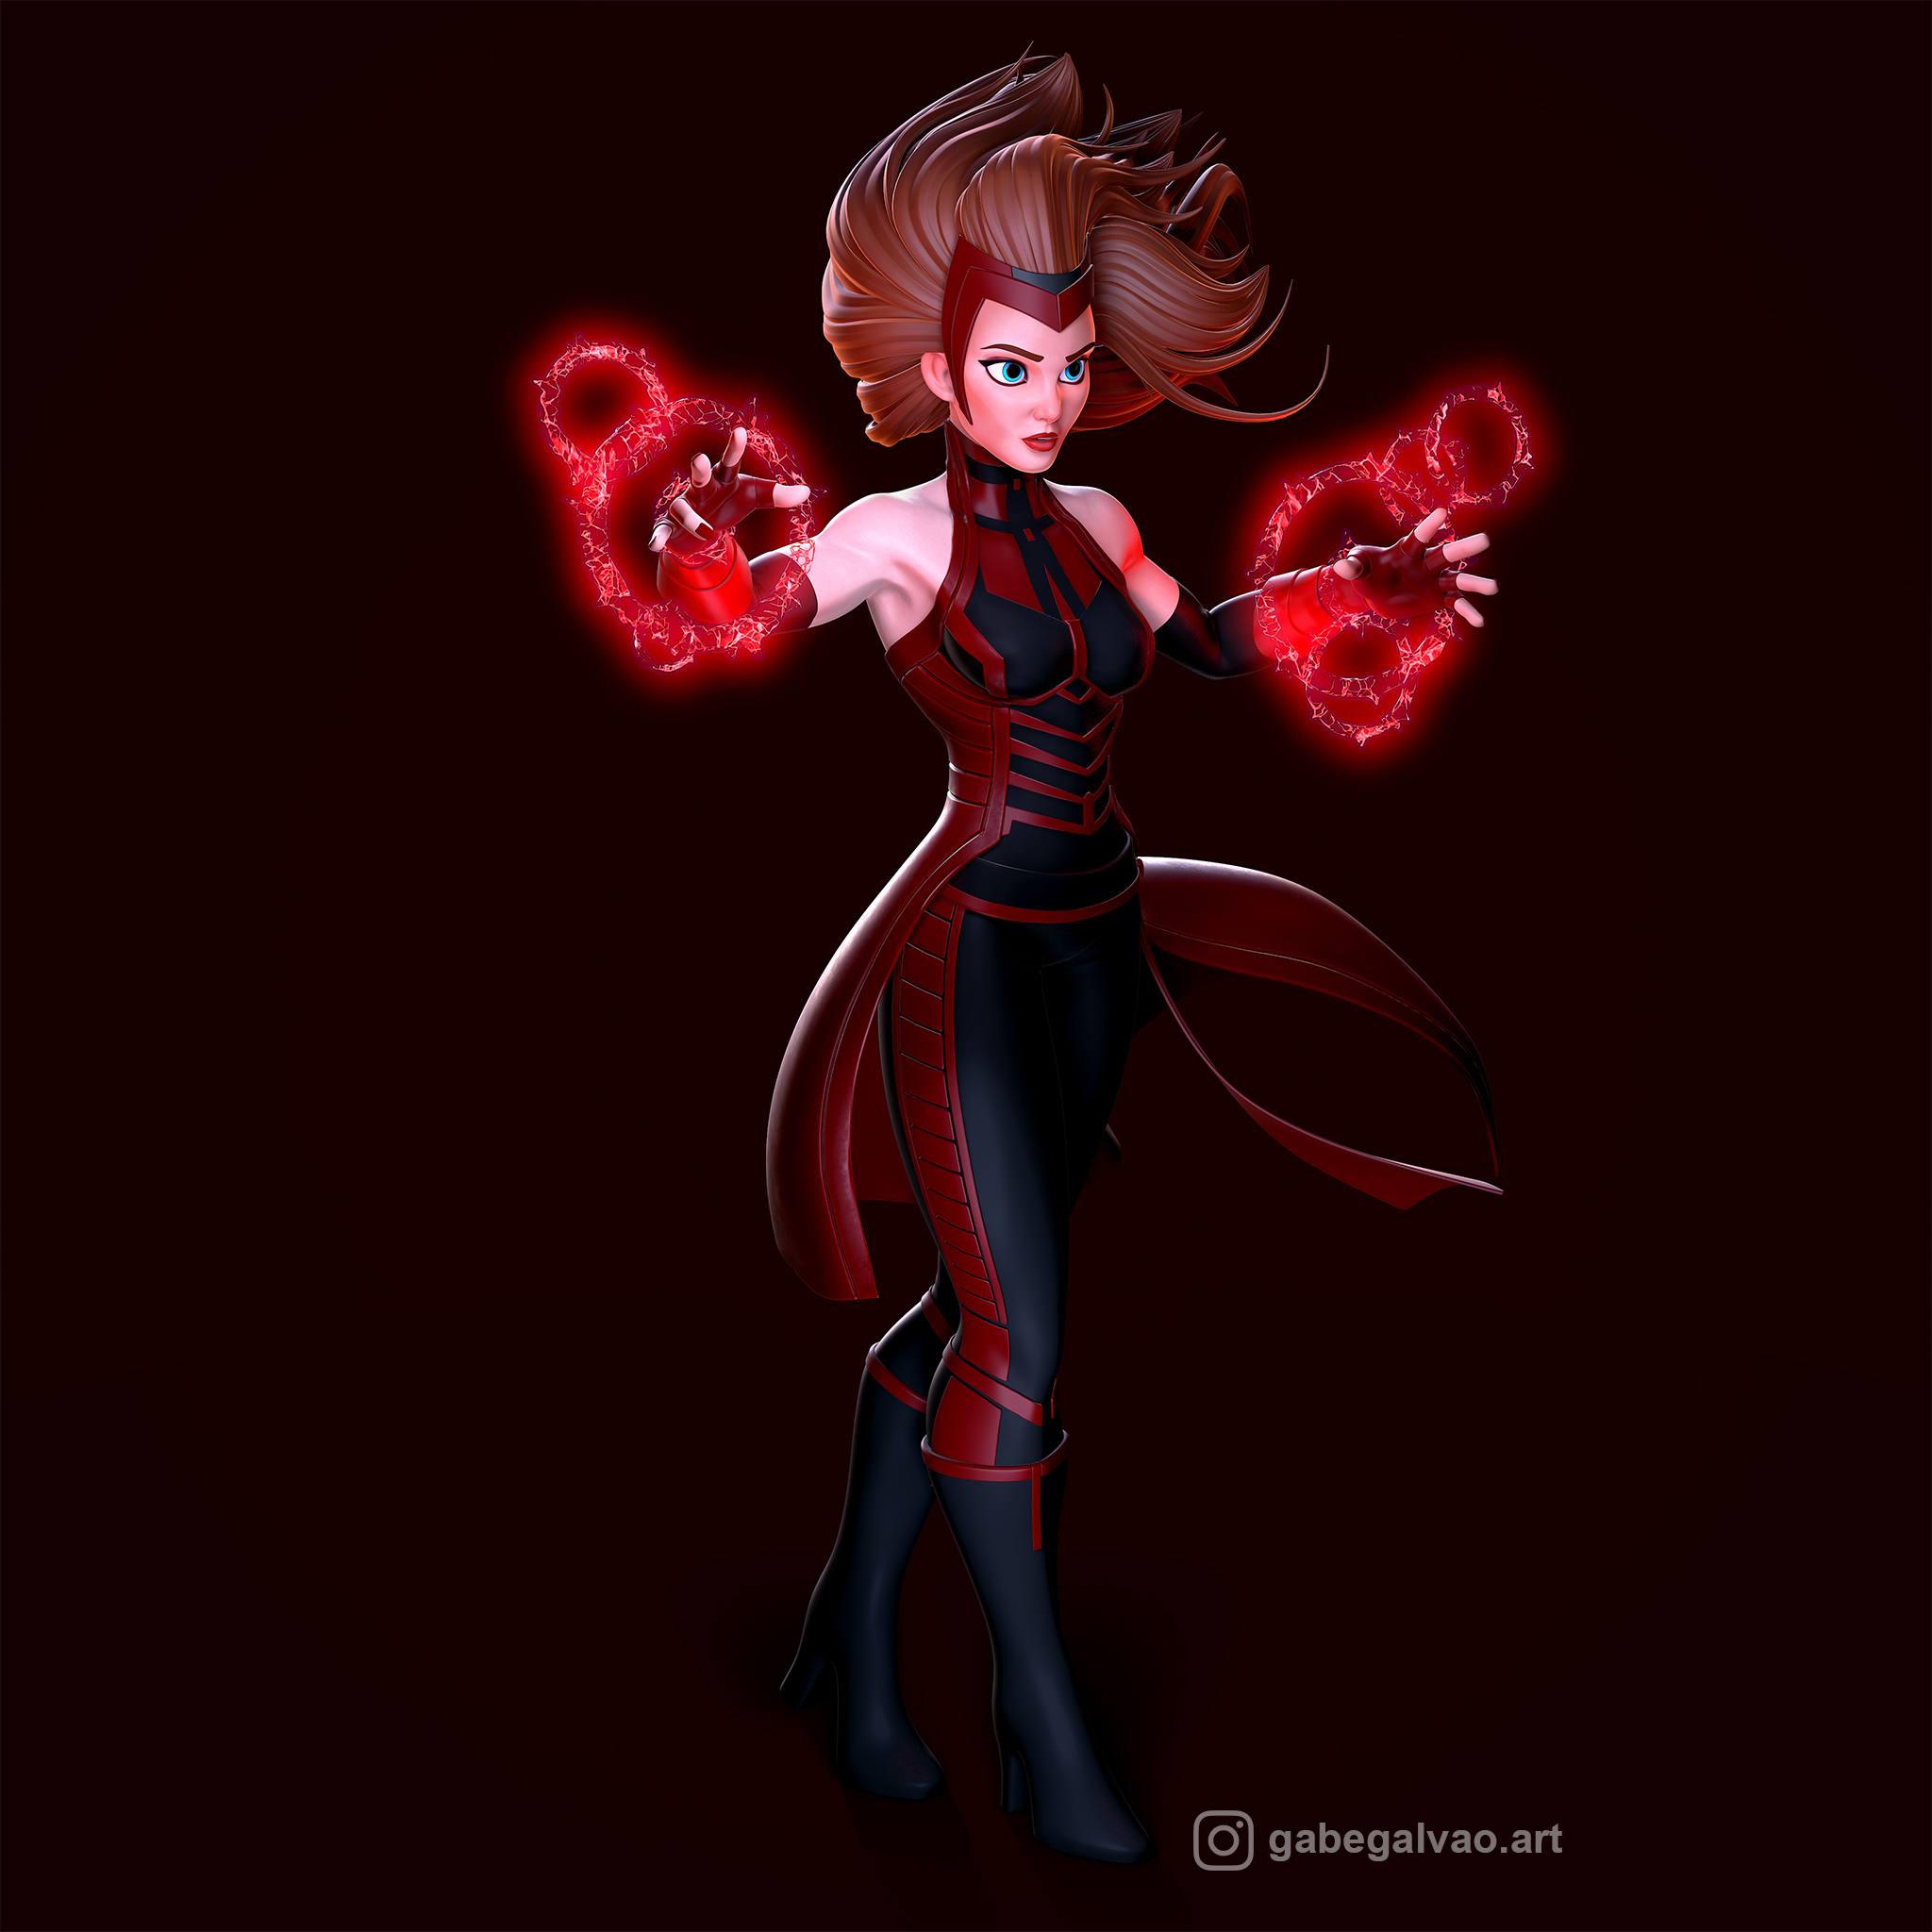 Wanda Maximoff - The Scarlet Witch